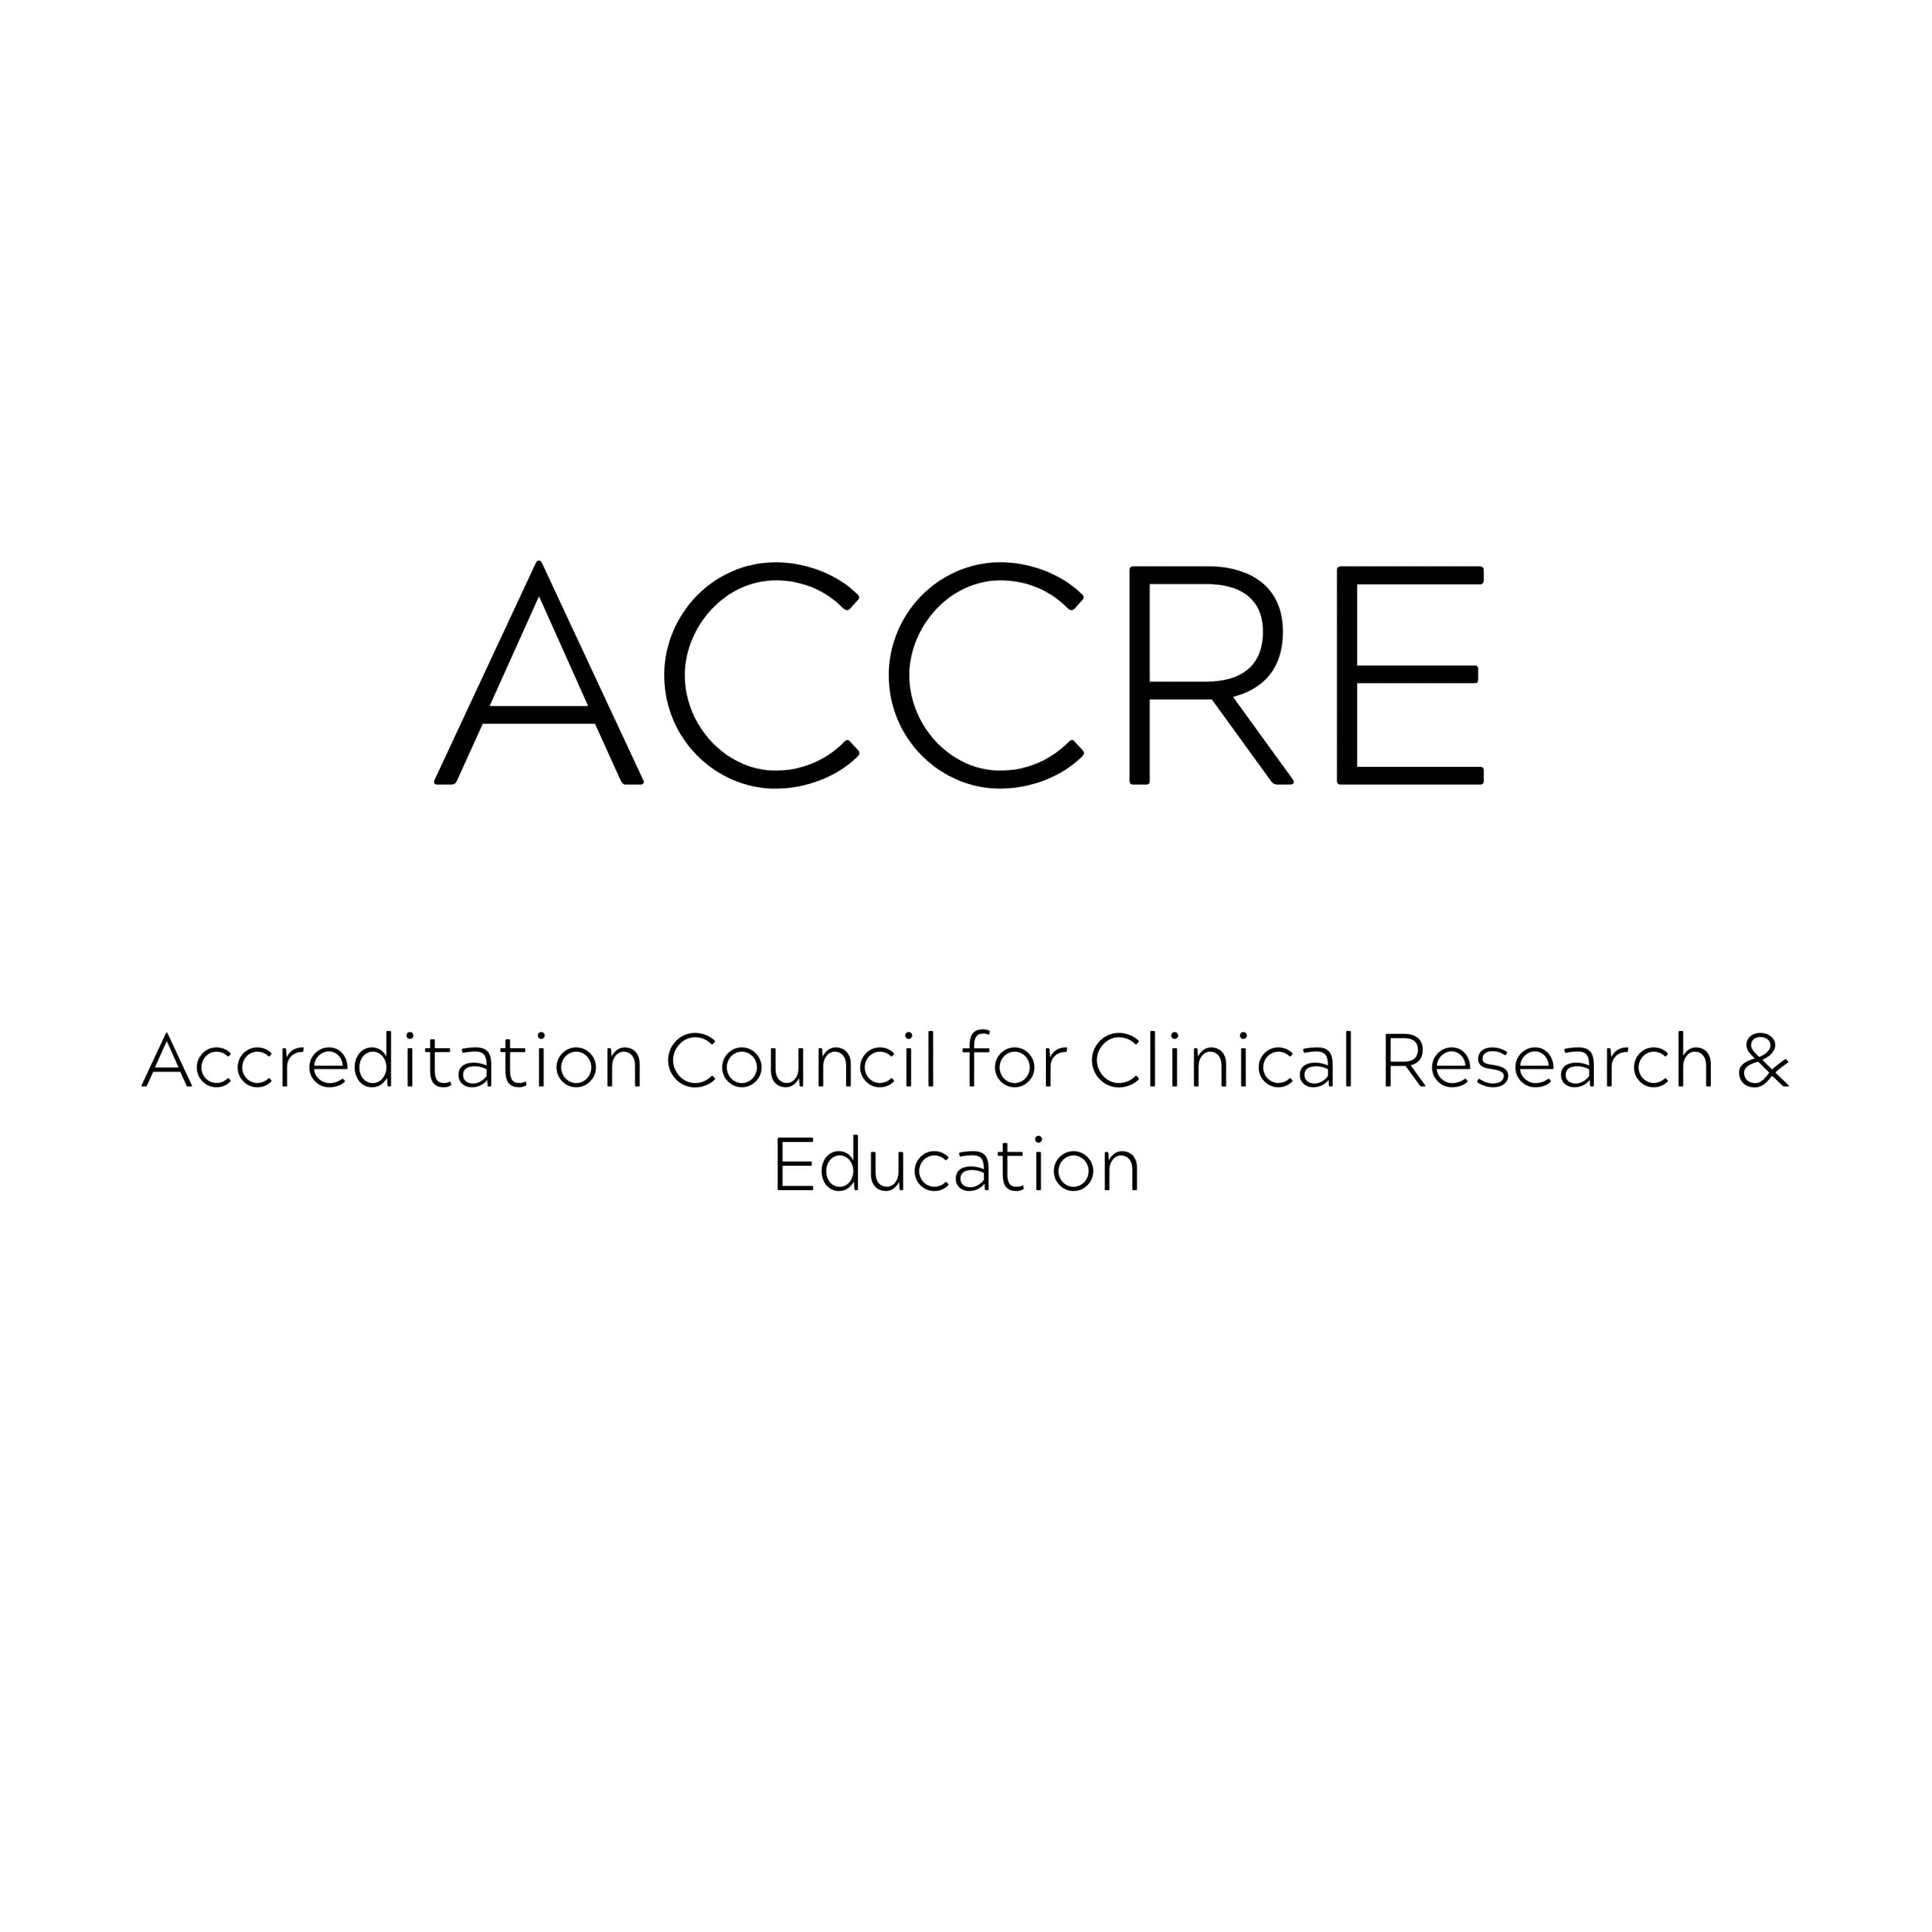 Accreditation Council for Clinical Research & Education logo